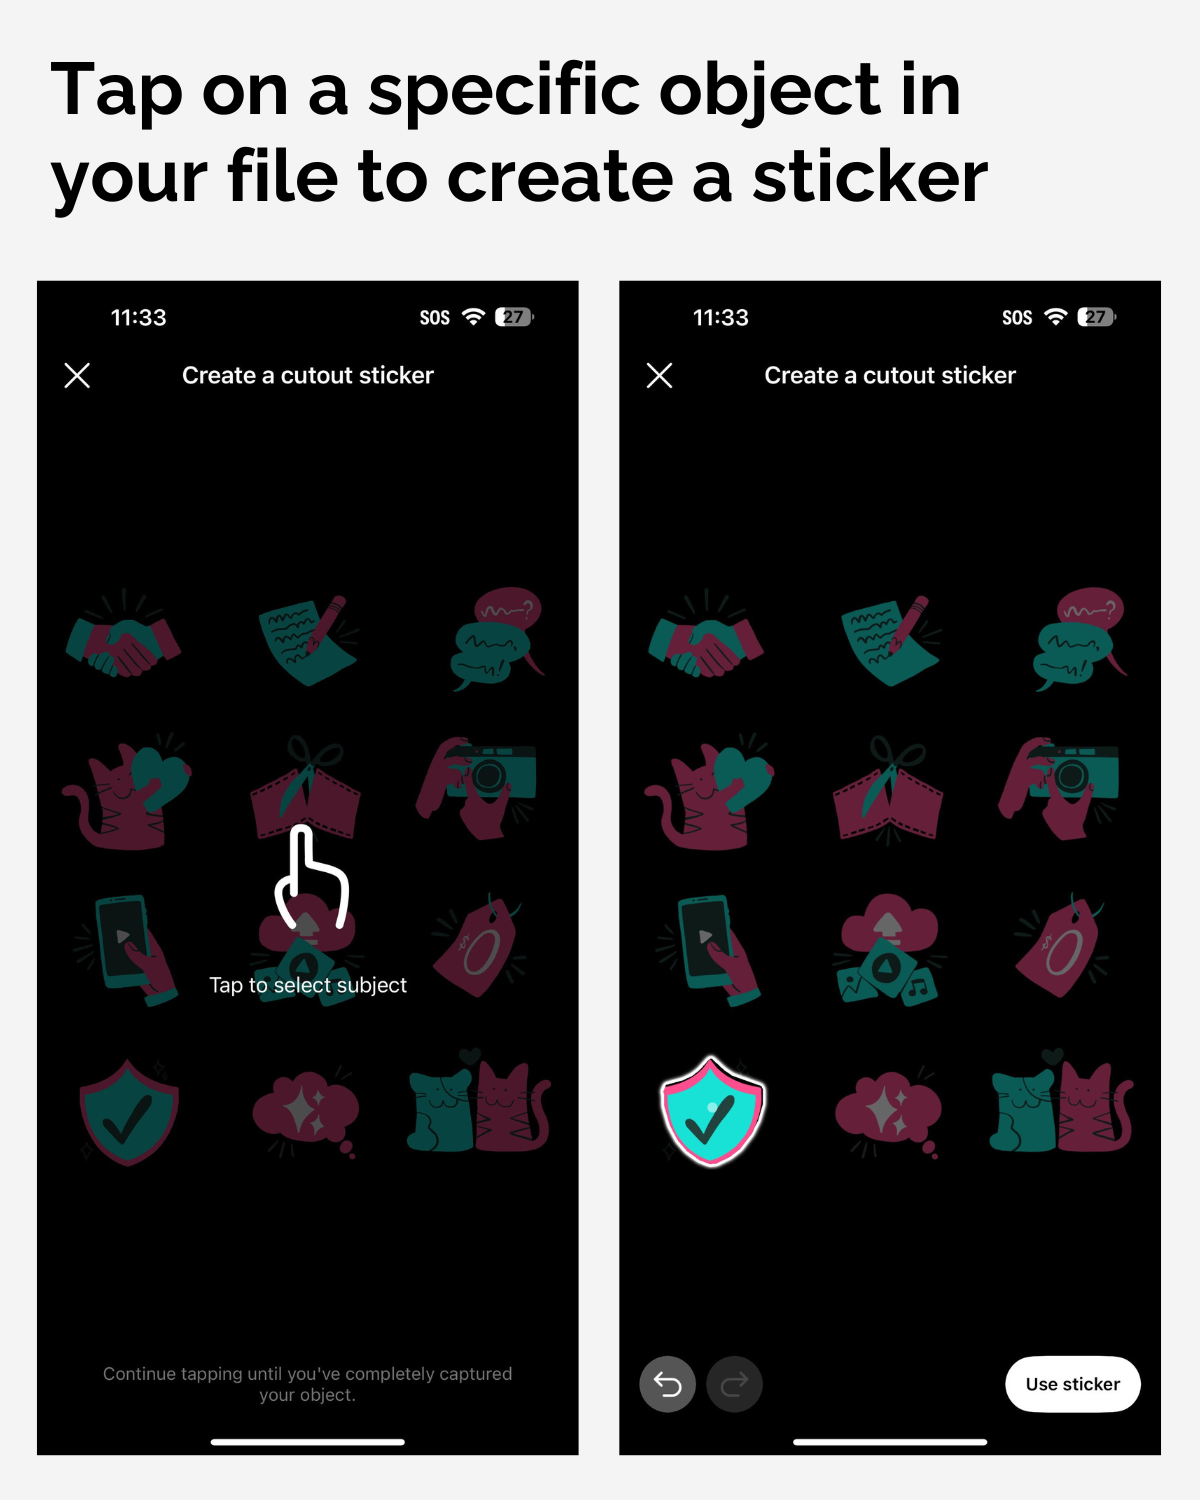 Instagram Cutouts: How to Make Custom Stickers on Instagram